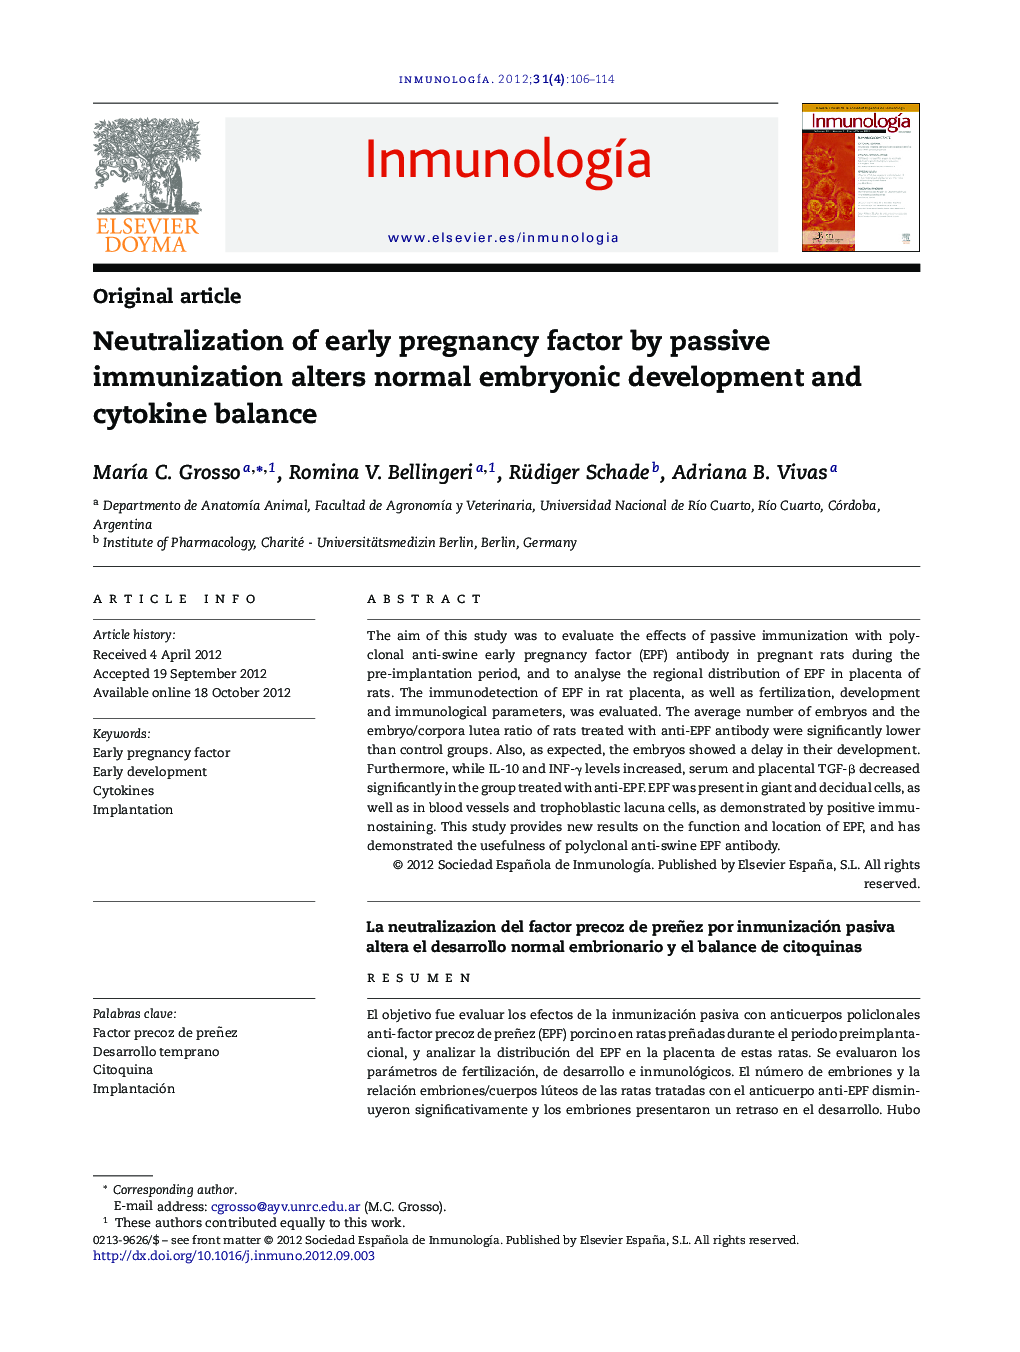 Neutralization of early pregnancy factor by passive immunization alters normal embryonic development and cytokine balance